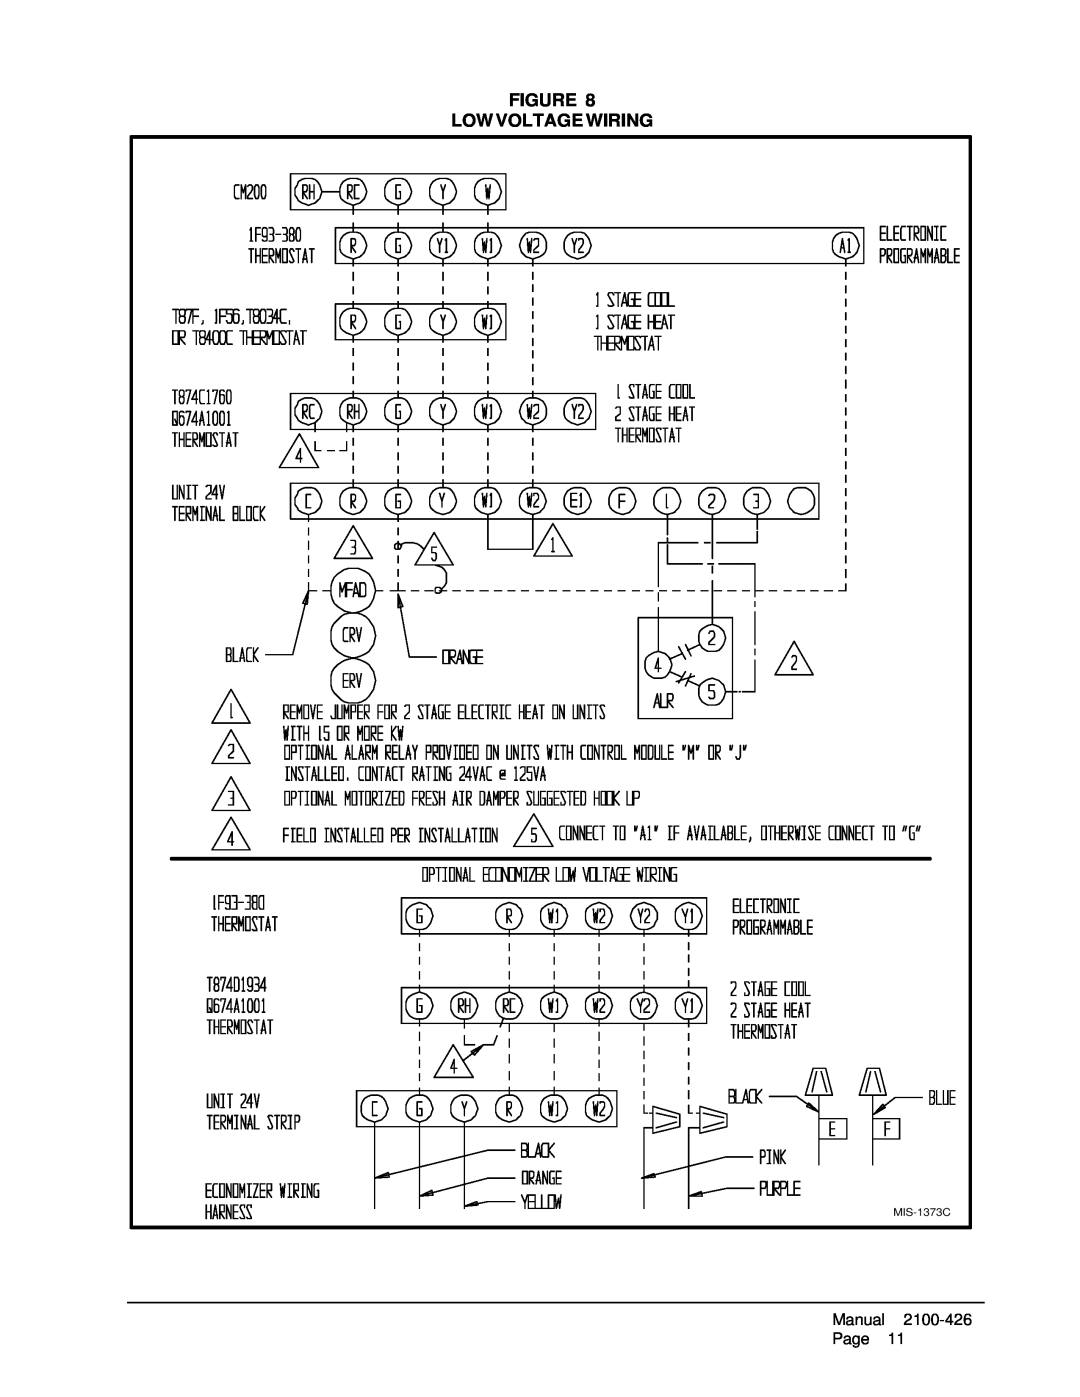 Bard WL701-B, WL701-C, WL702-A installation instructions Figure Low Voltage Wiring, Manual, 2100-426, Page, MIS-1373C 